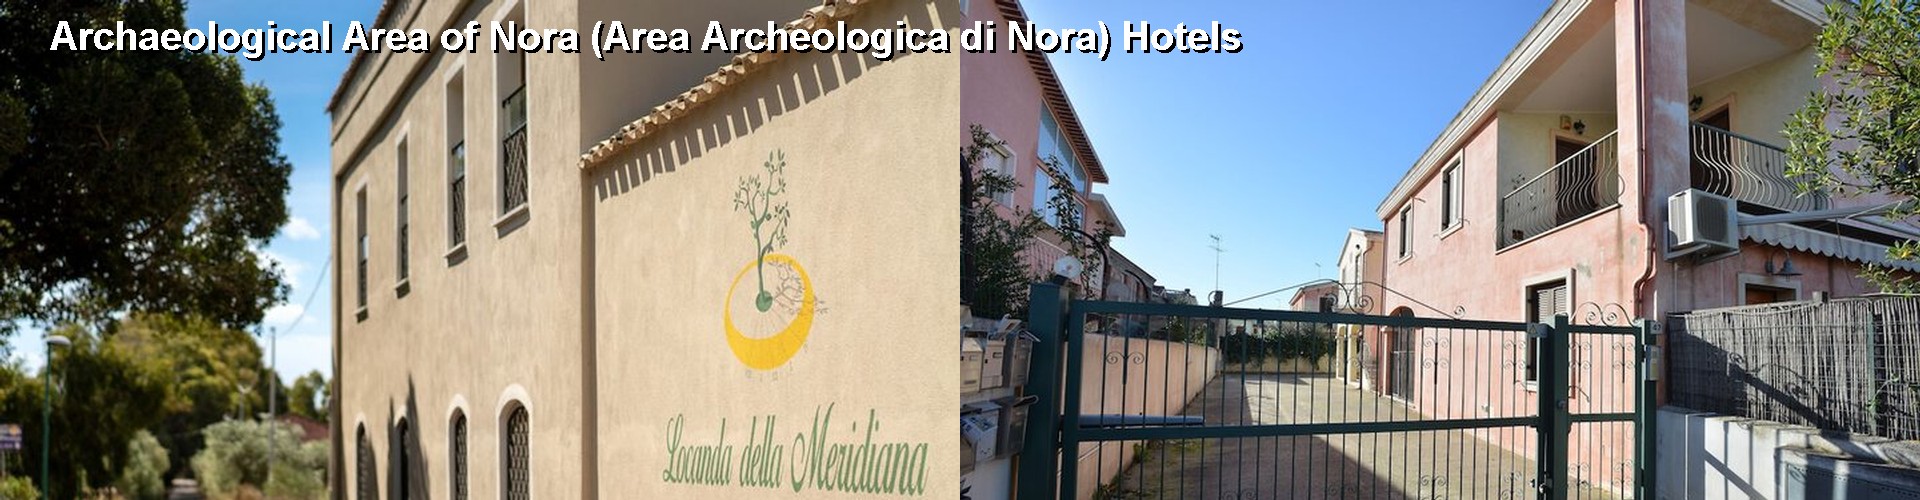 5 Best Hotels near Archaeological Area of Nora (Area Archeologica di Nora)